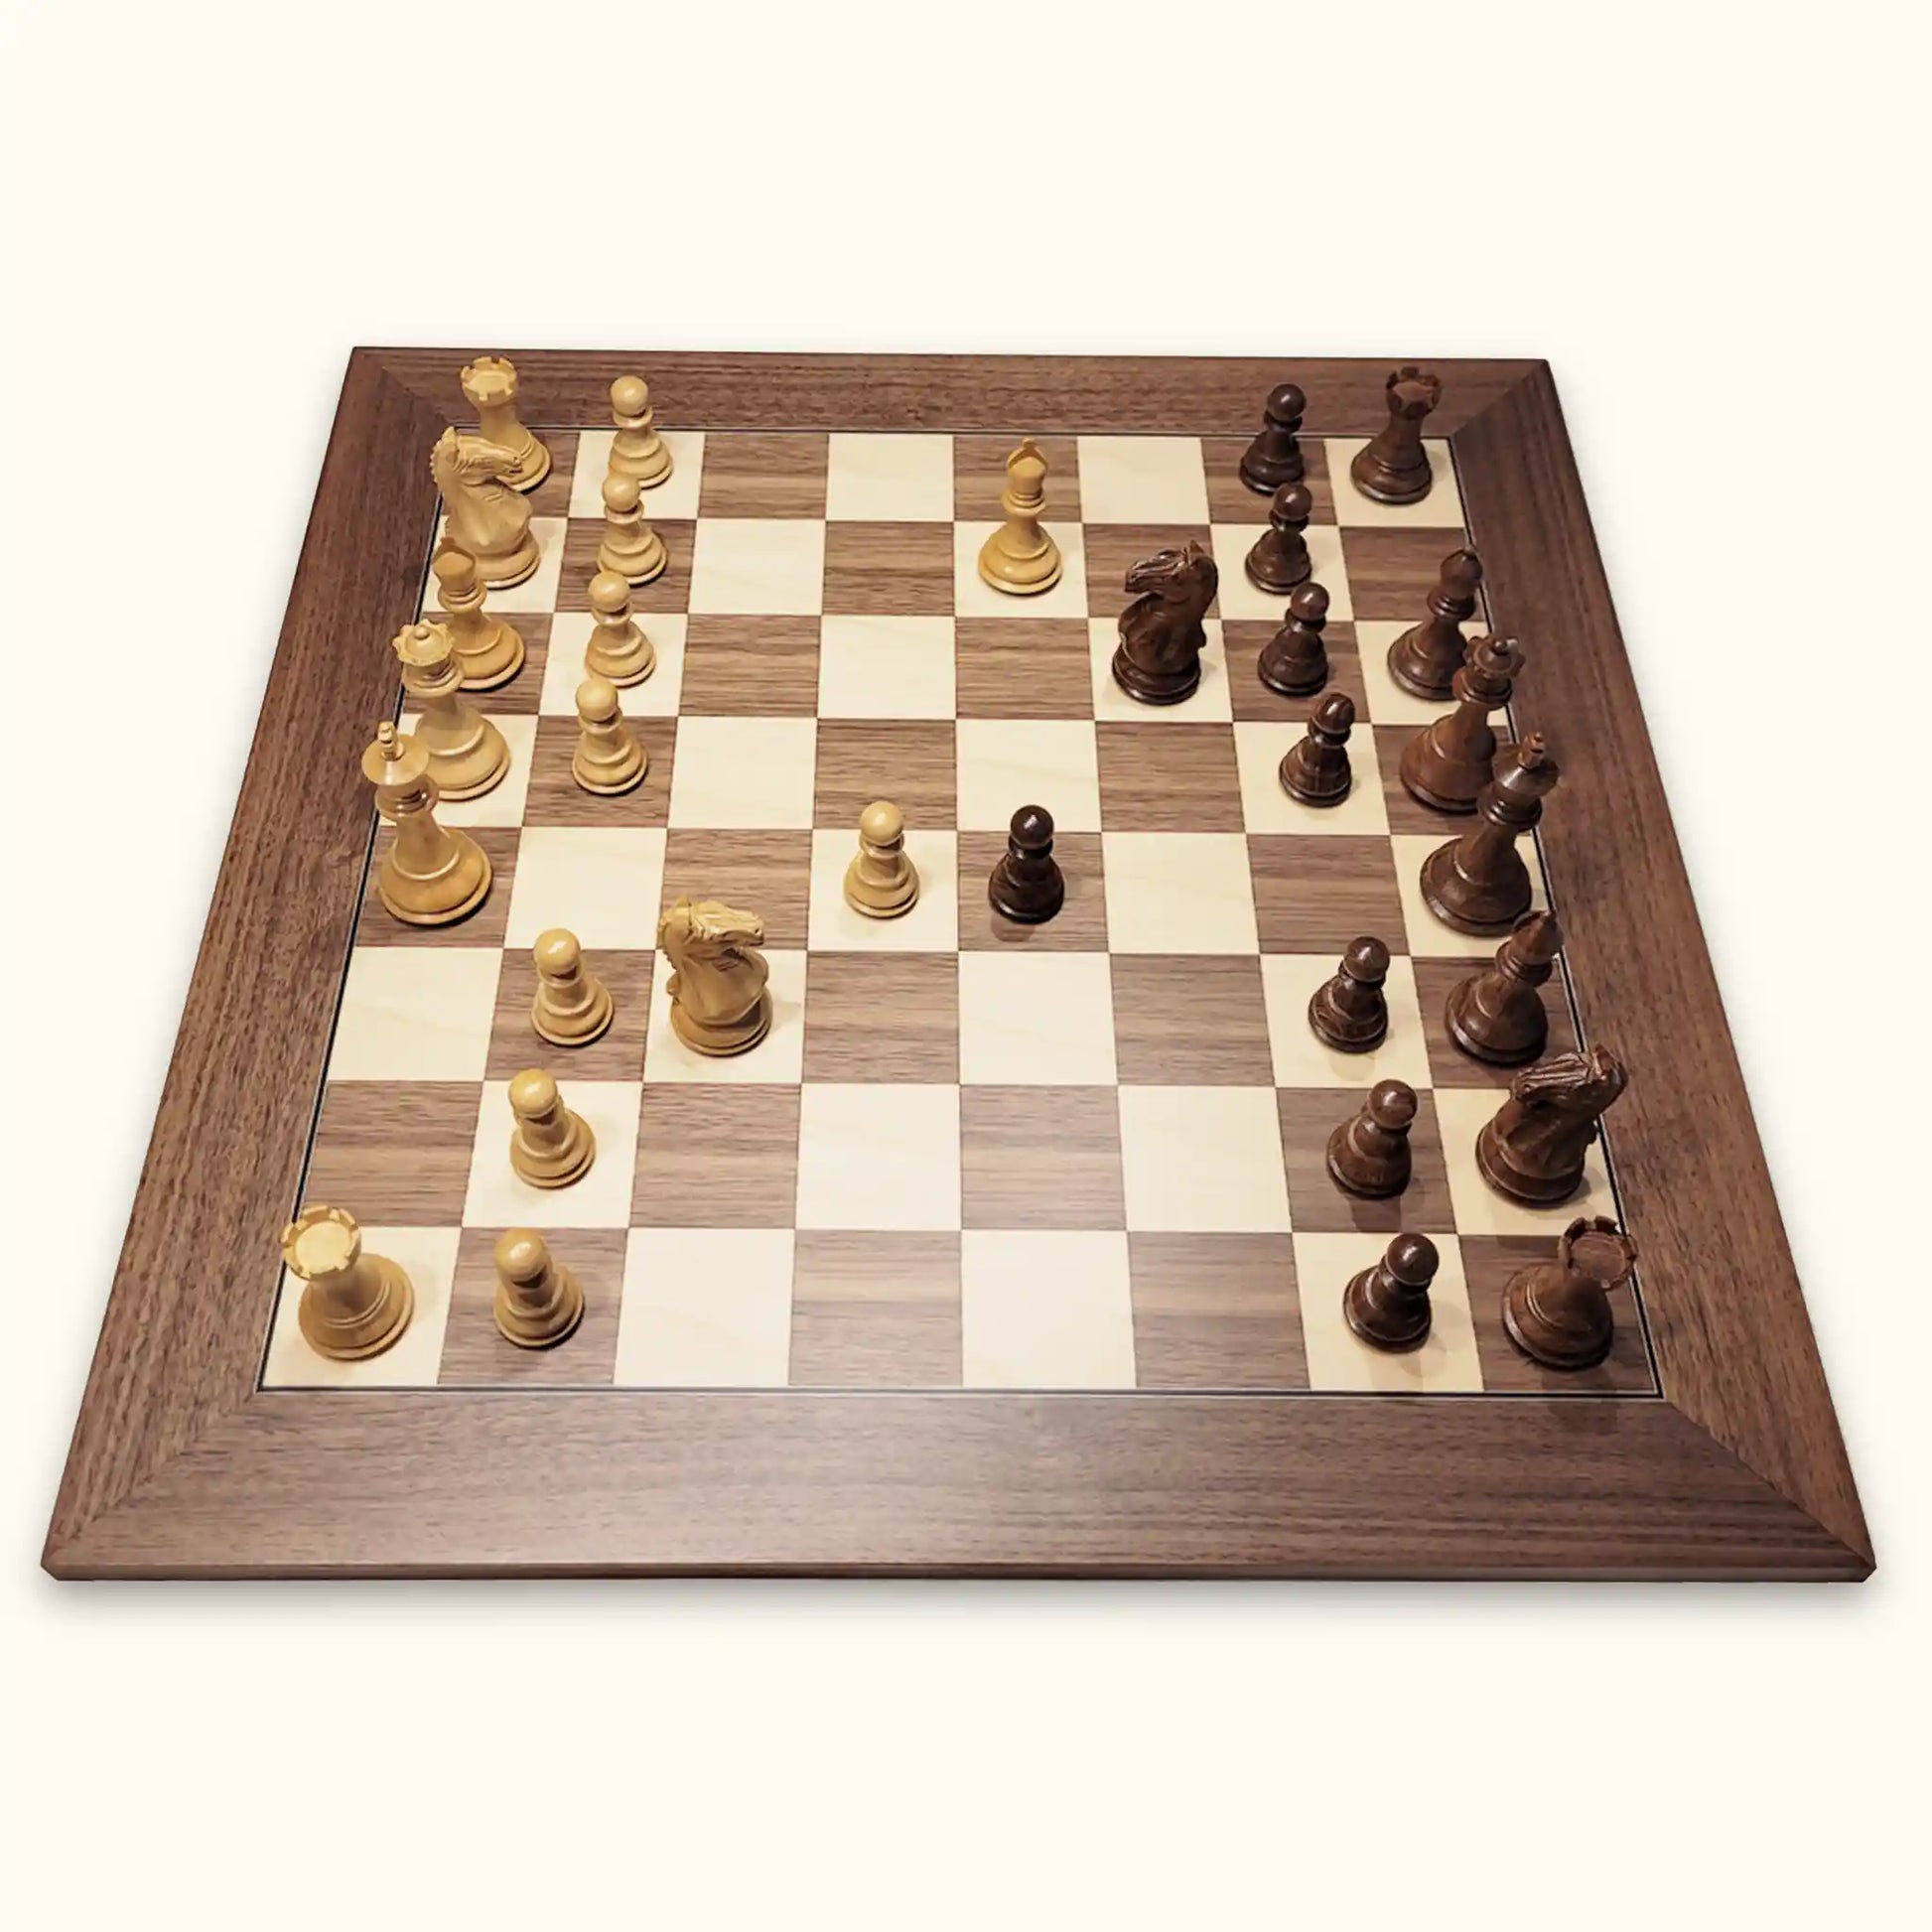 Chess set london at dawn with chess pieces supreme and chessboard walnut deluxe side view